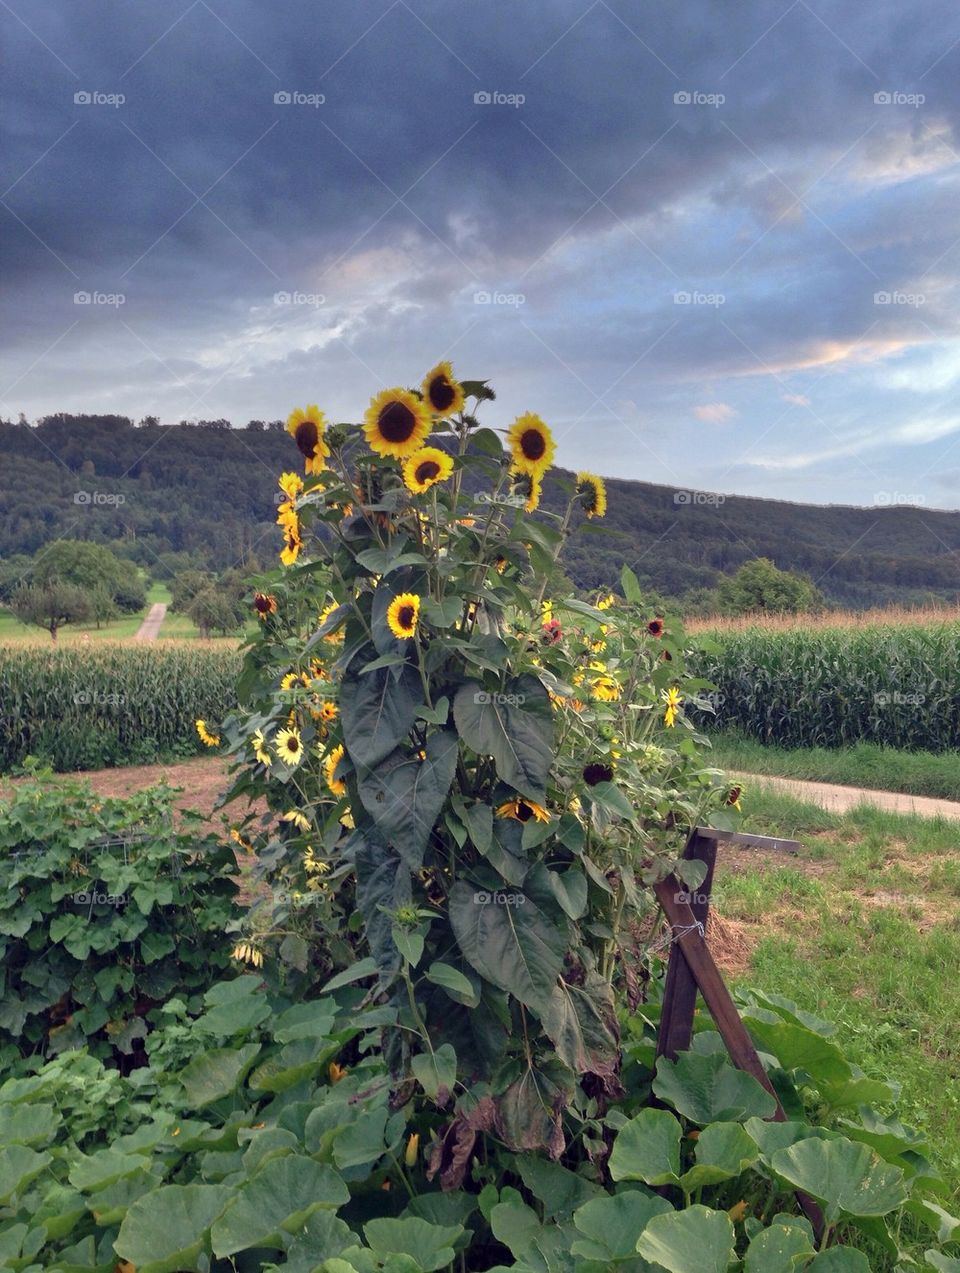 Sunflowers with clouds